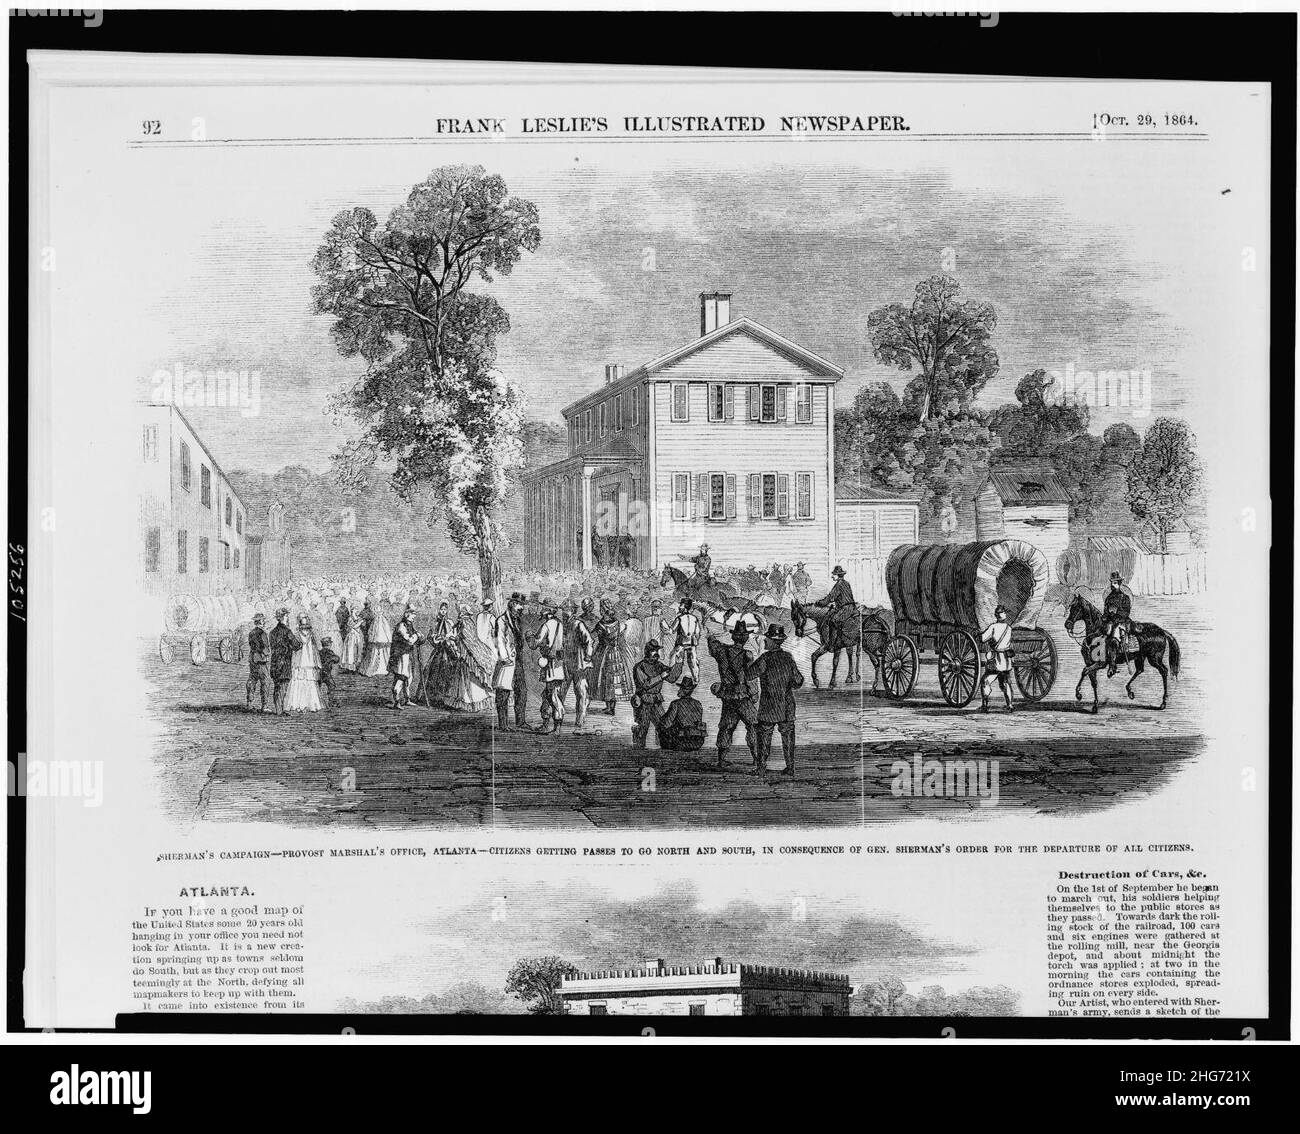 Sherman's campaign-provost marshal's office, Atlanta-citizens getting passes to go north and south, in consequence of Gen. Sherman's order for the departure of all citizens Stock Photo